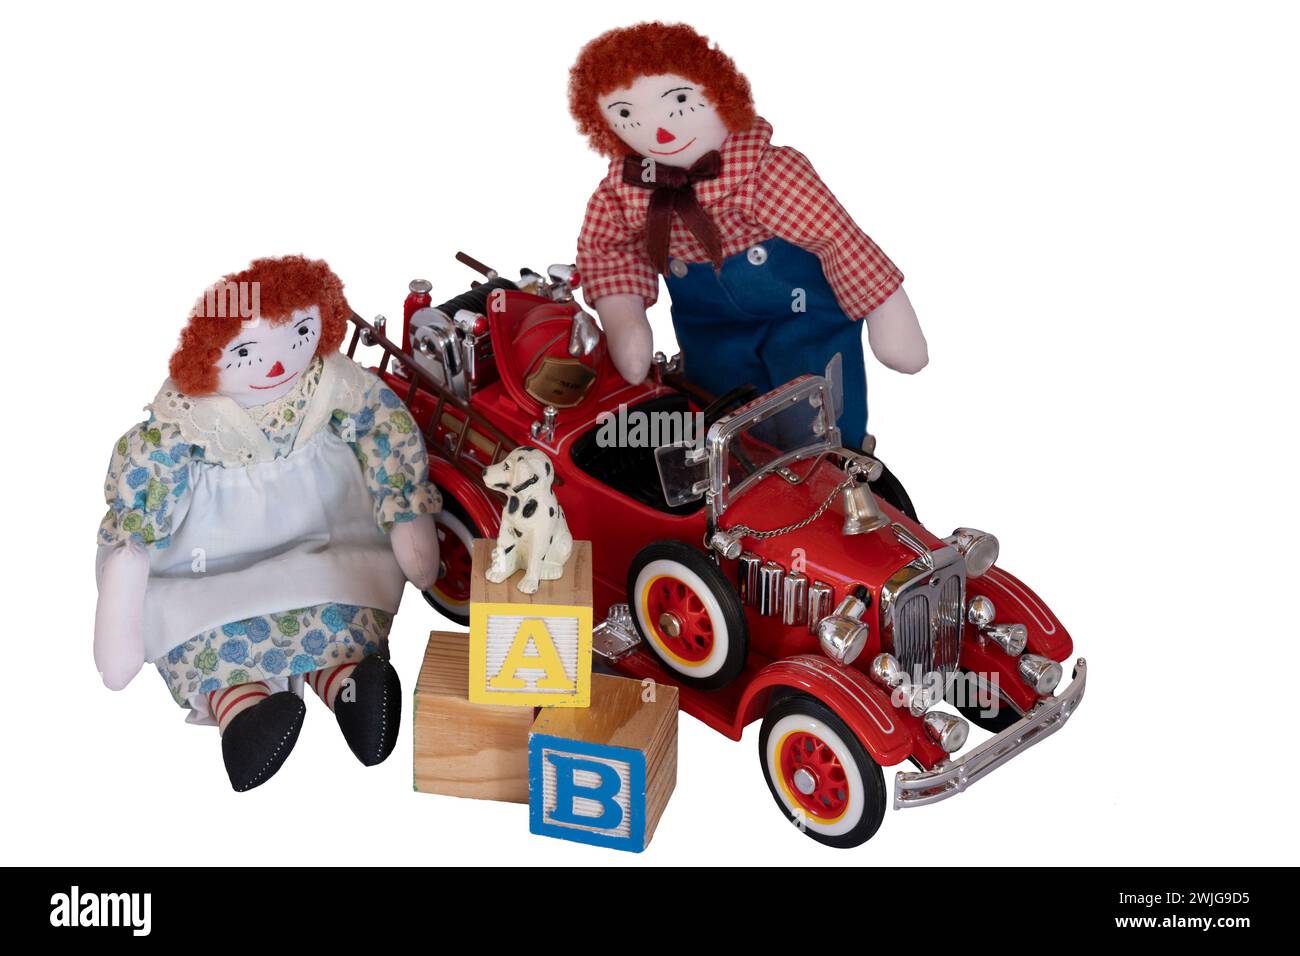 Handmade rag dolls, Raggedy Ann & Andy placed among toys, blocks, fire engine, little dog, fireman hat, old & newer toys in wood and metal. Isolated Stock Photo